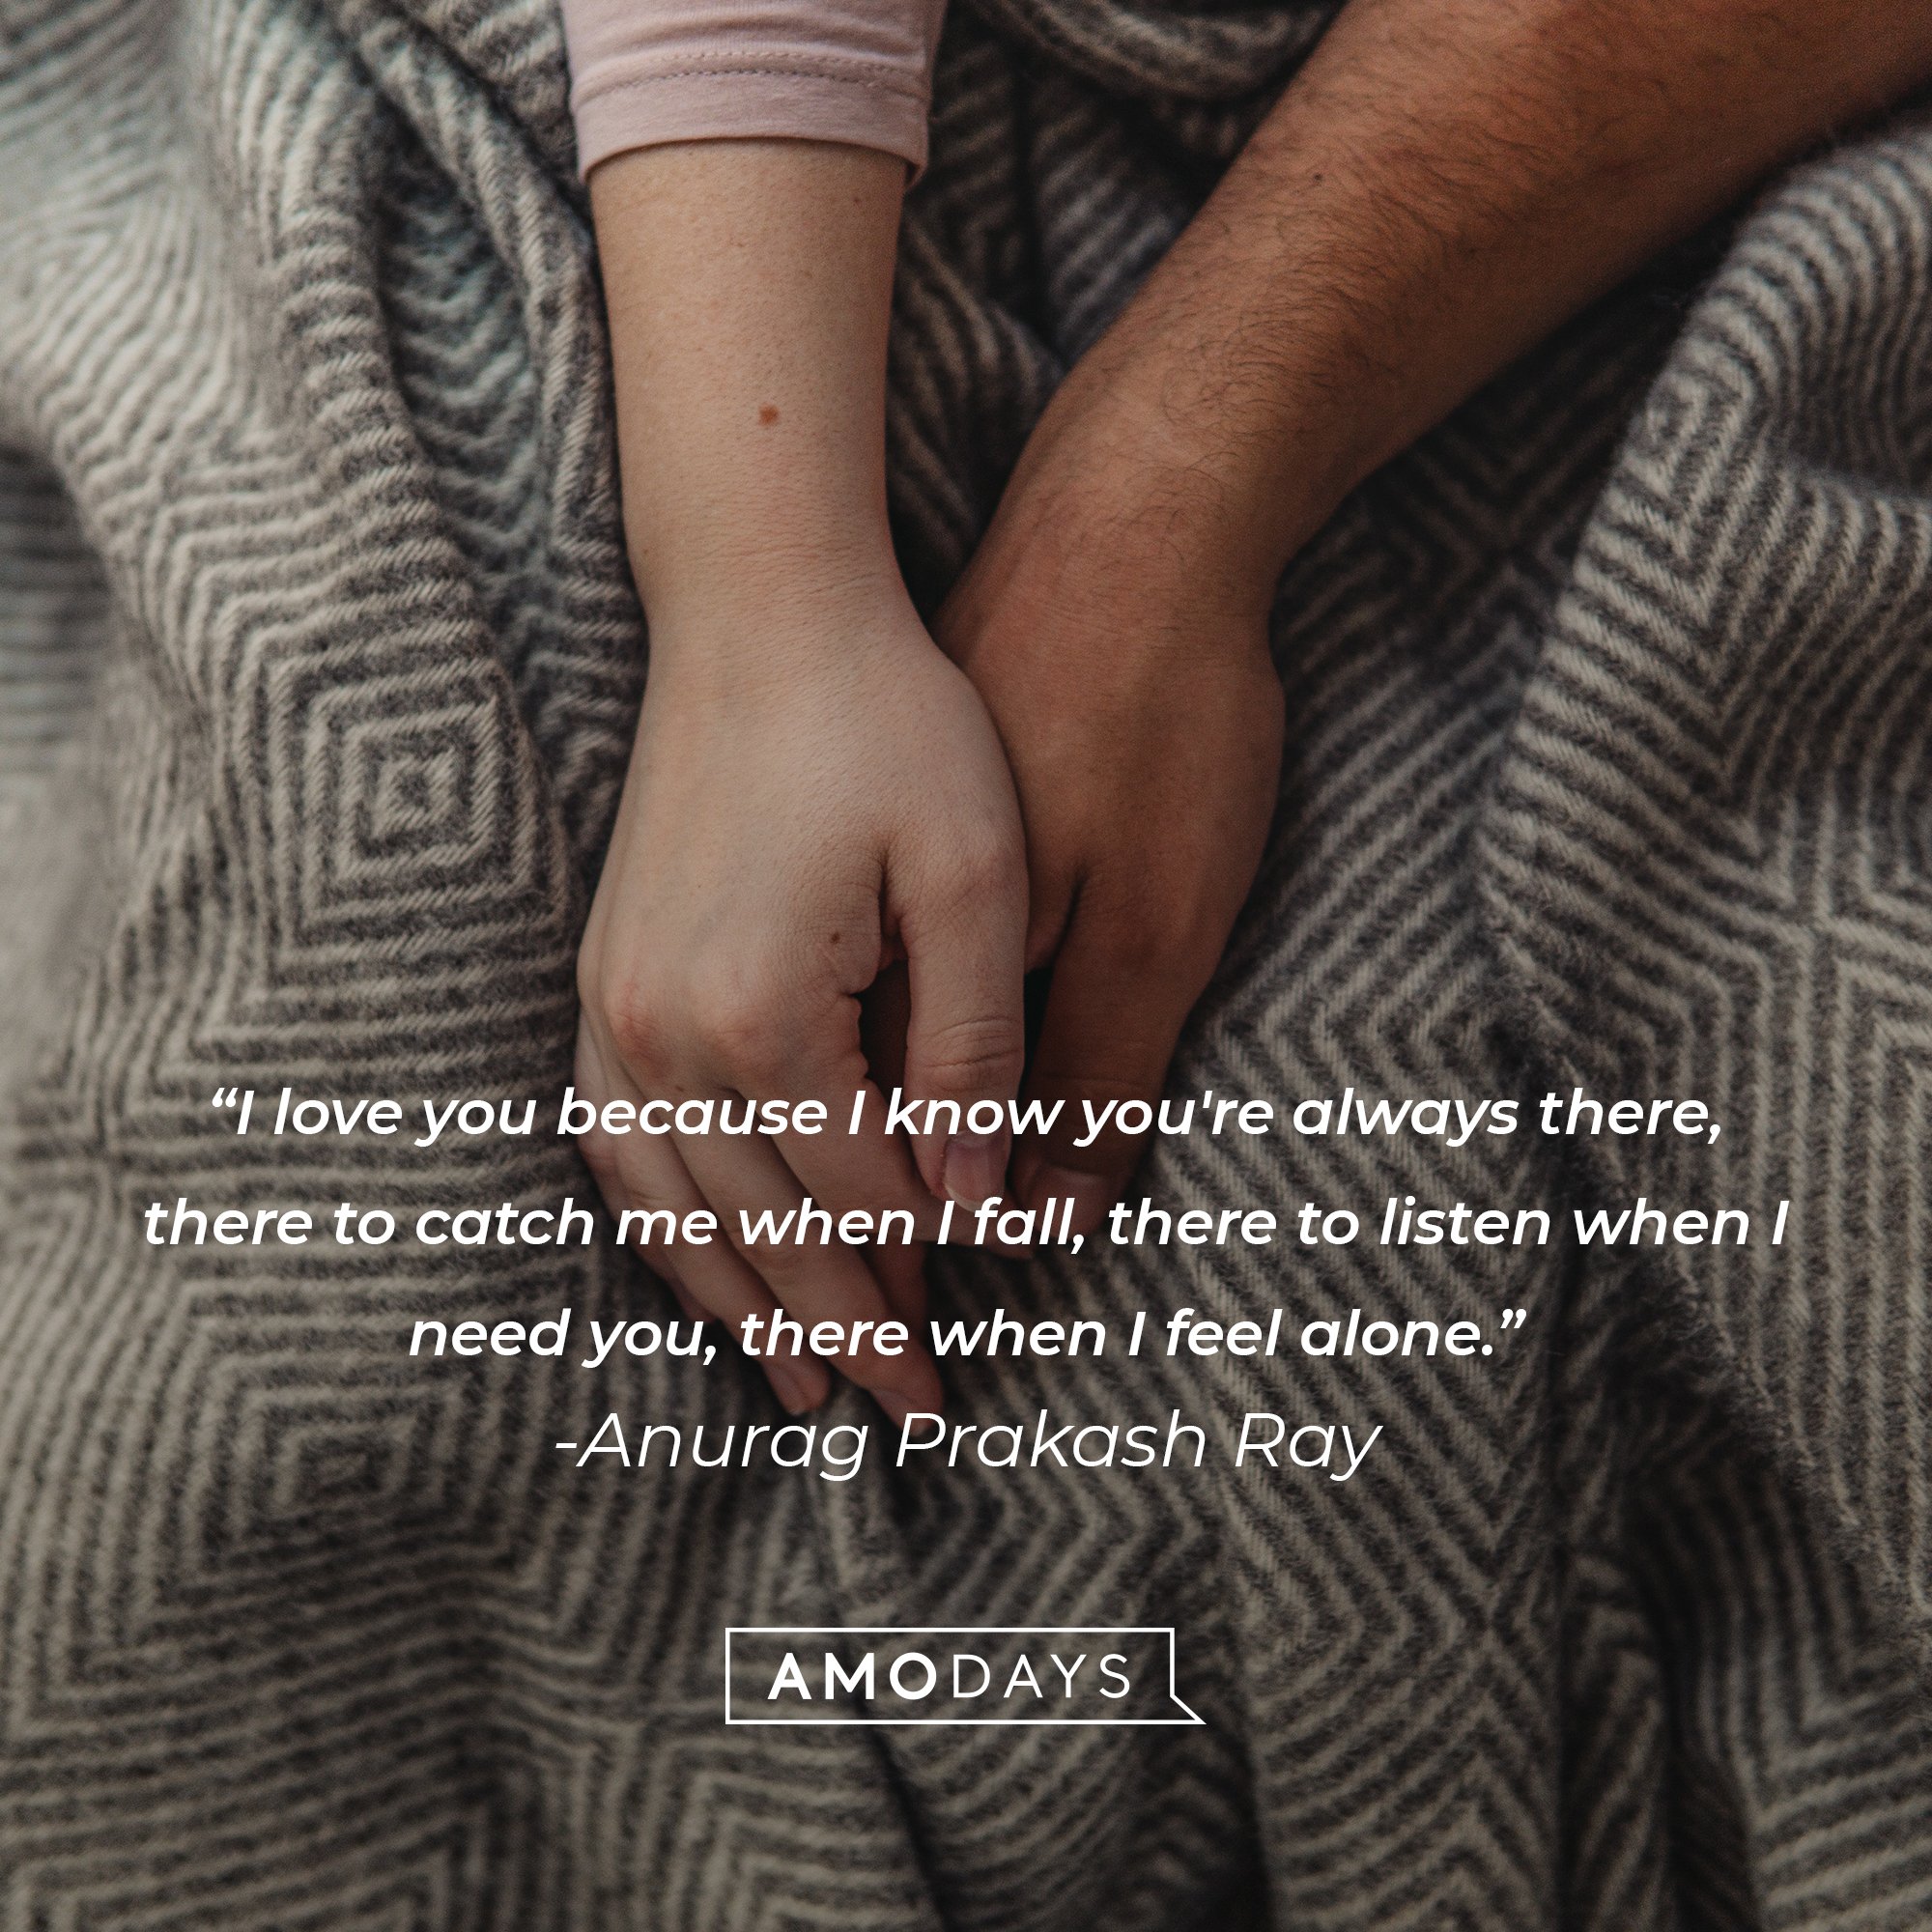 Anurag Prakash Ray’s quote: "I love you because I know you're always there, there to catch me when I fall, there to listen when I need you, there when I feel alone." | Image: AmoDays